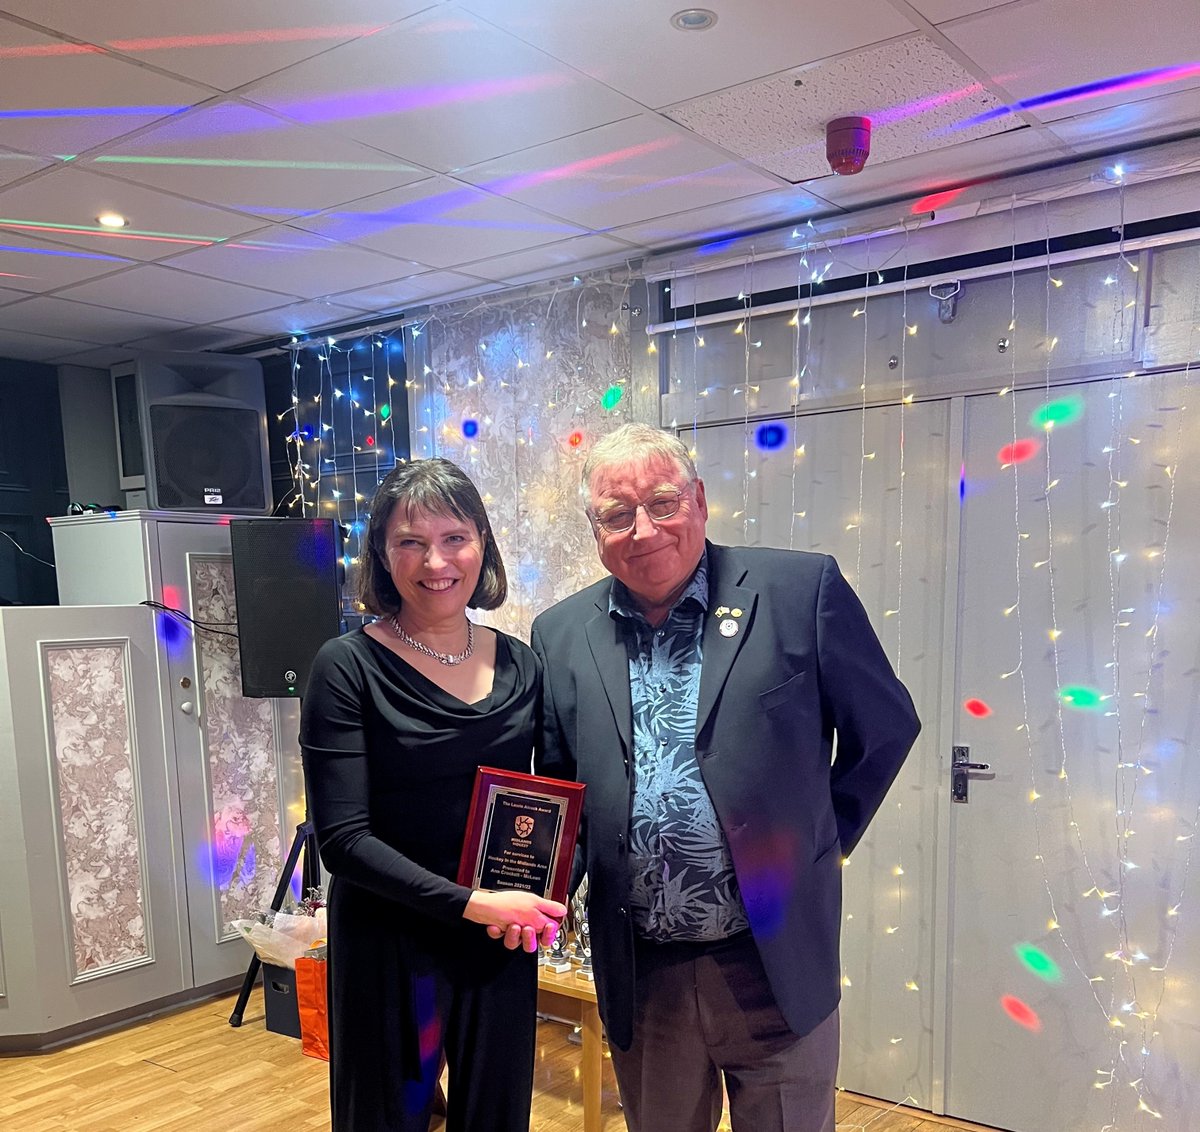 Congratulations to Ann Crockett-McLean who received the Laurie Alcock Award for her tireless work at Newark HC - read more at tinyurl.com/376skwuj